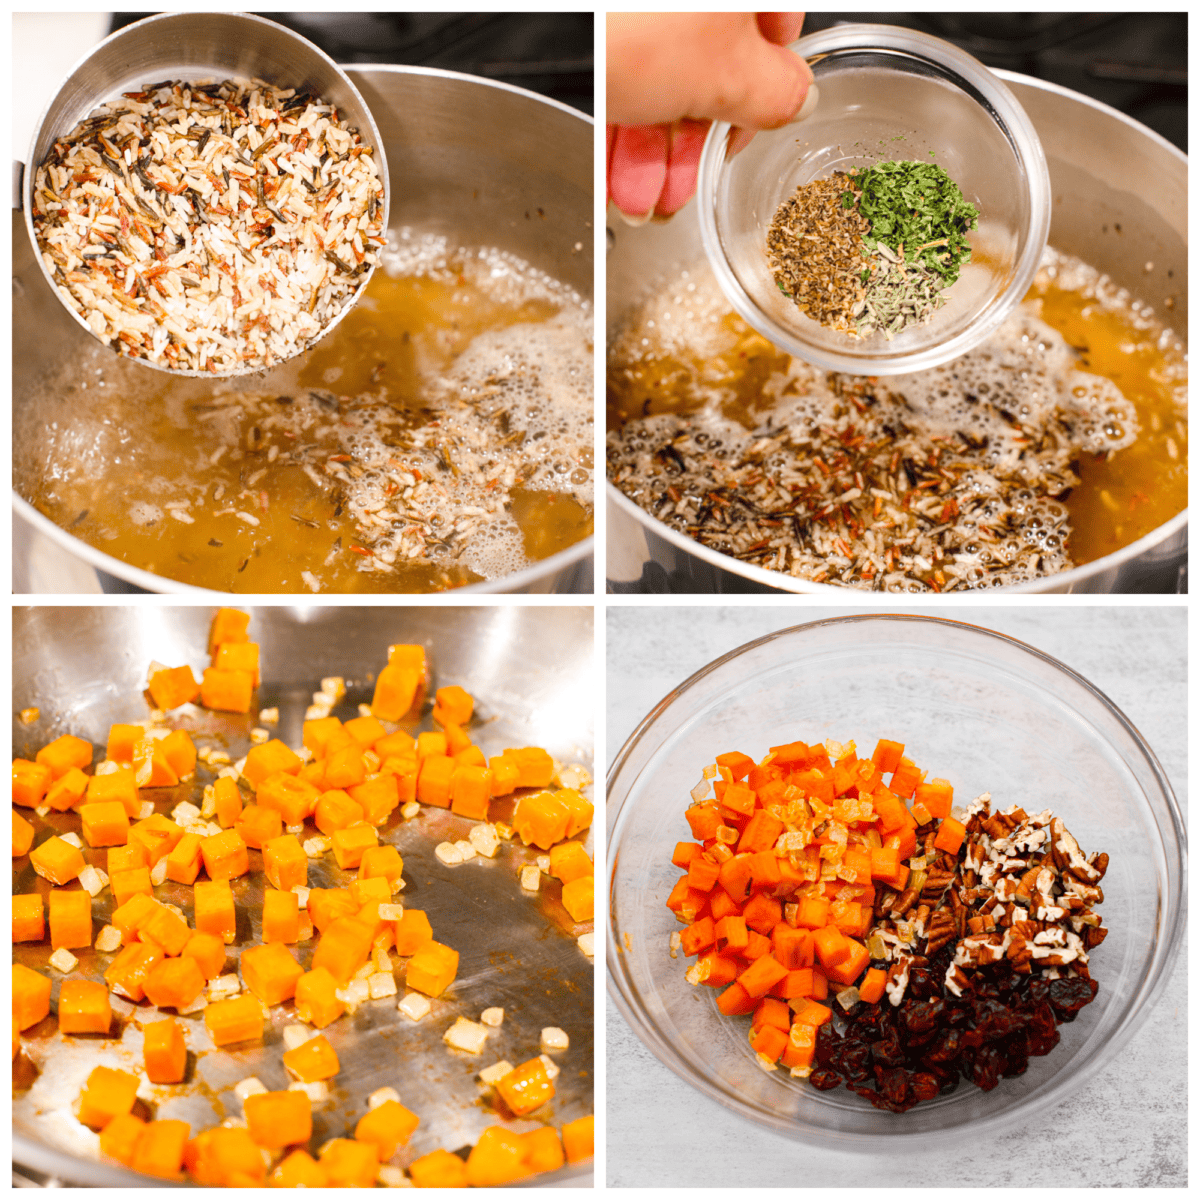 First process photo of wild rice being added to a saucepan of broth. Second process photo of the herbs being added to the wild rice. Third process photo of the diced sweet potato and onions cooking in a skillet. Fourth process photo of the chopped pecans, craisins, and sweet potato in a bowl.